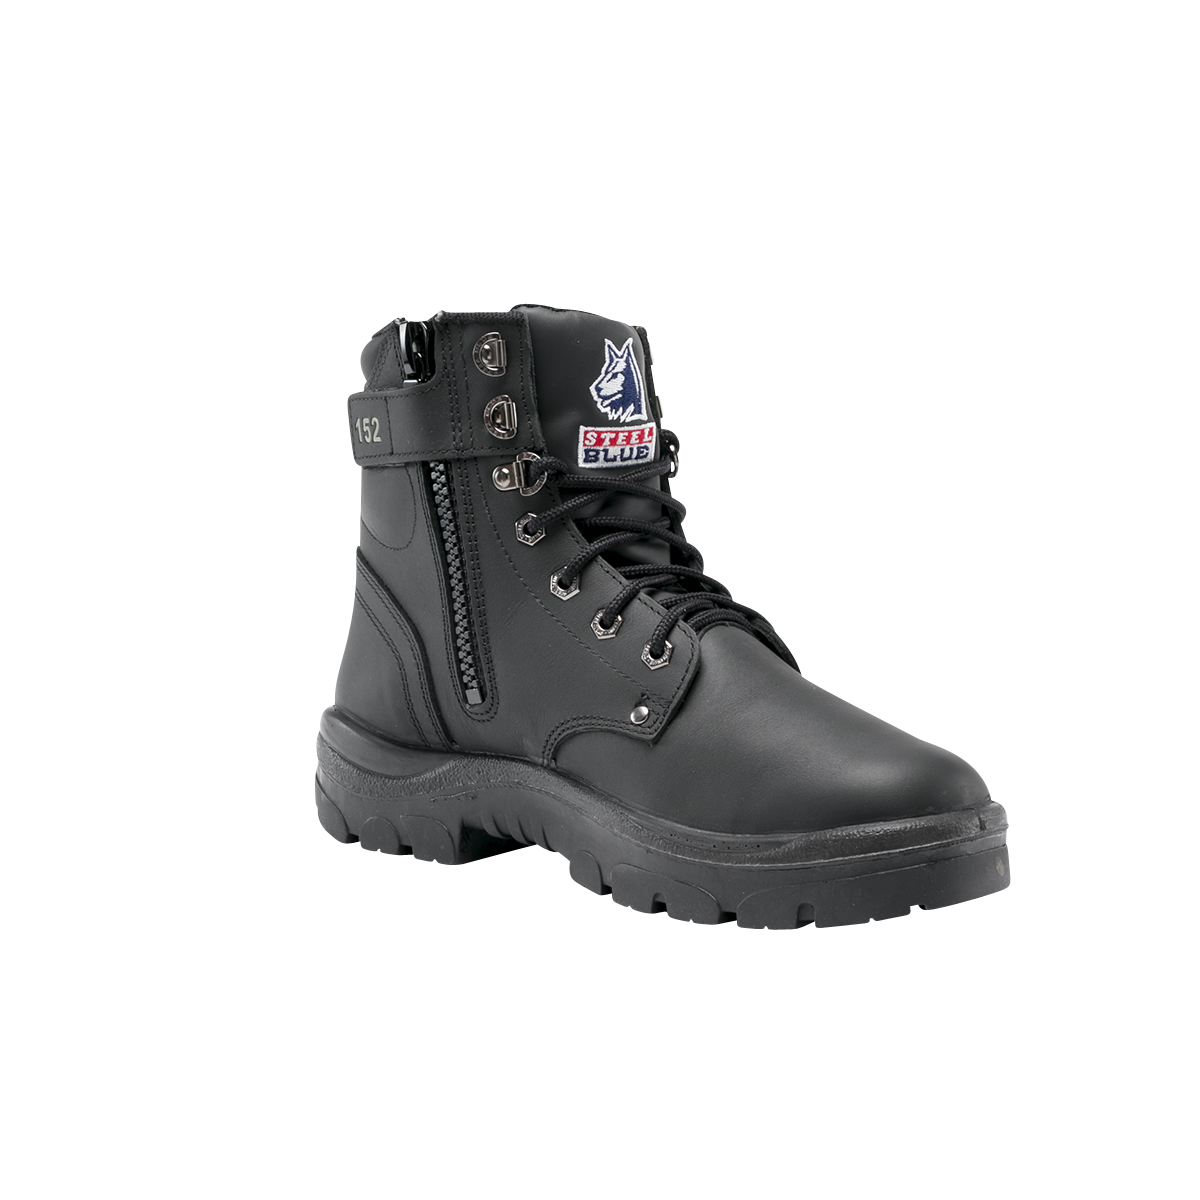 SAFETY BOOT ARGYLE NITRILE ZIP S10 -ANKLE HEIGHT LACE BLACK